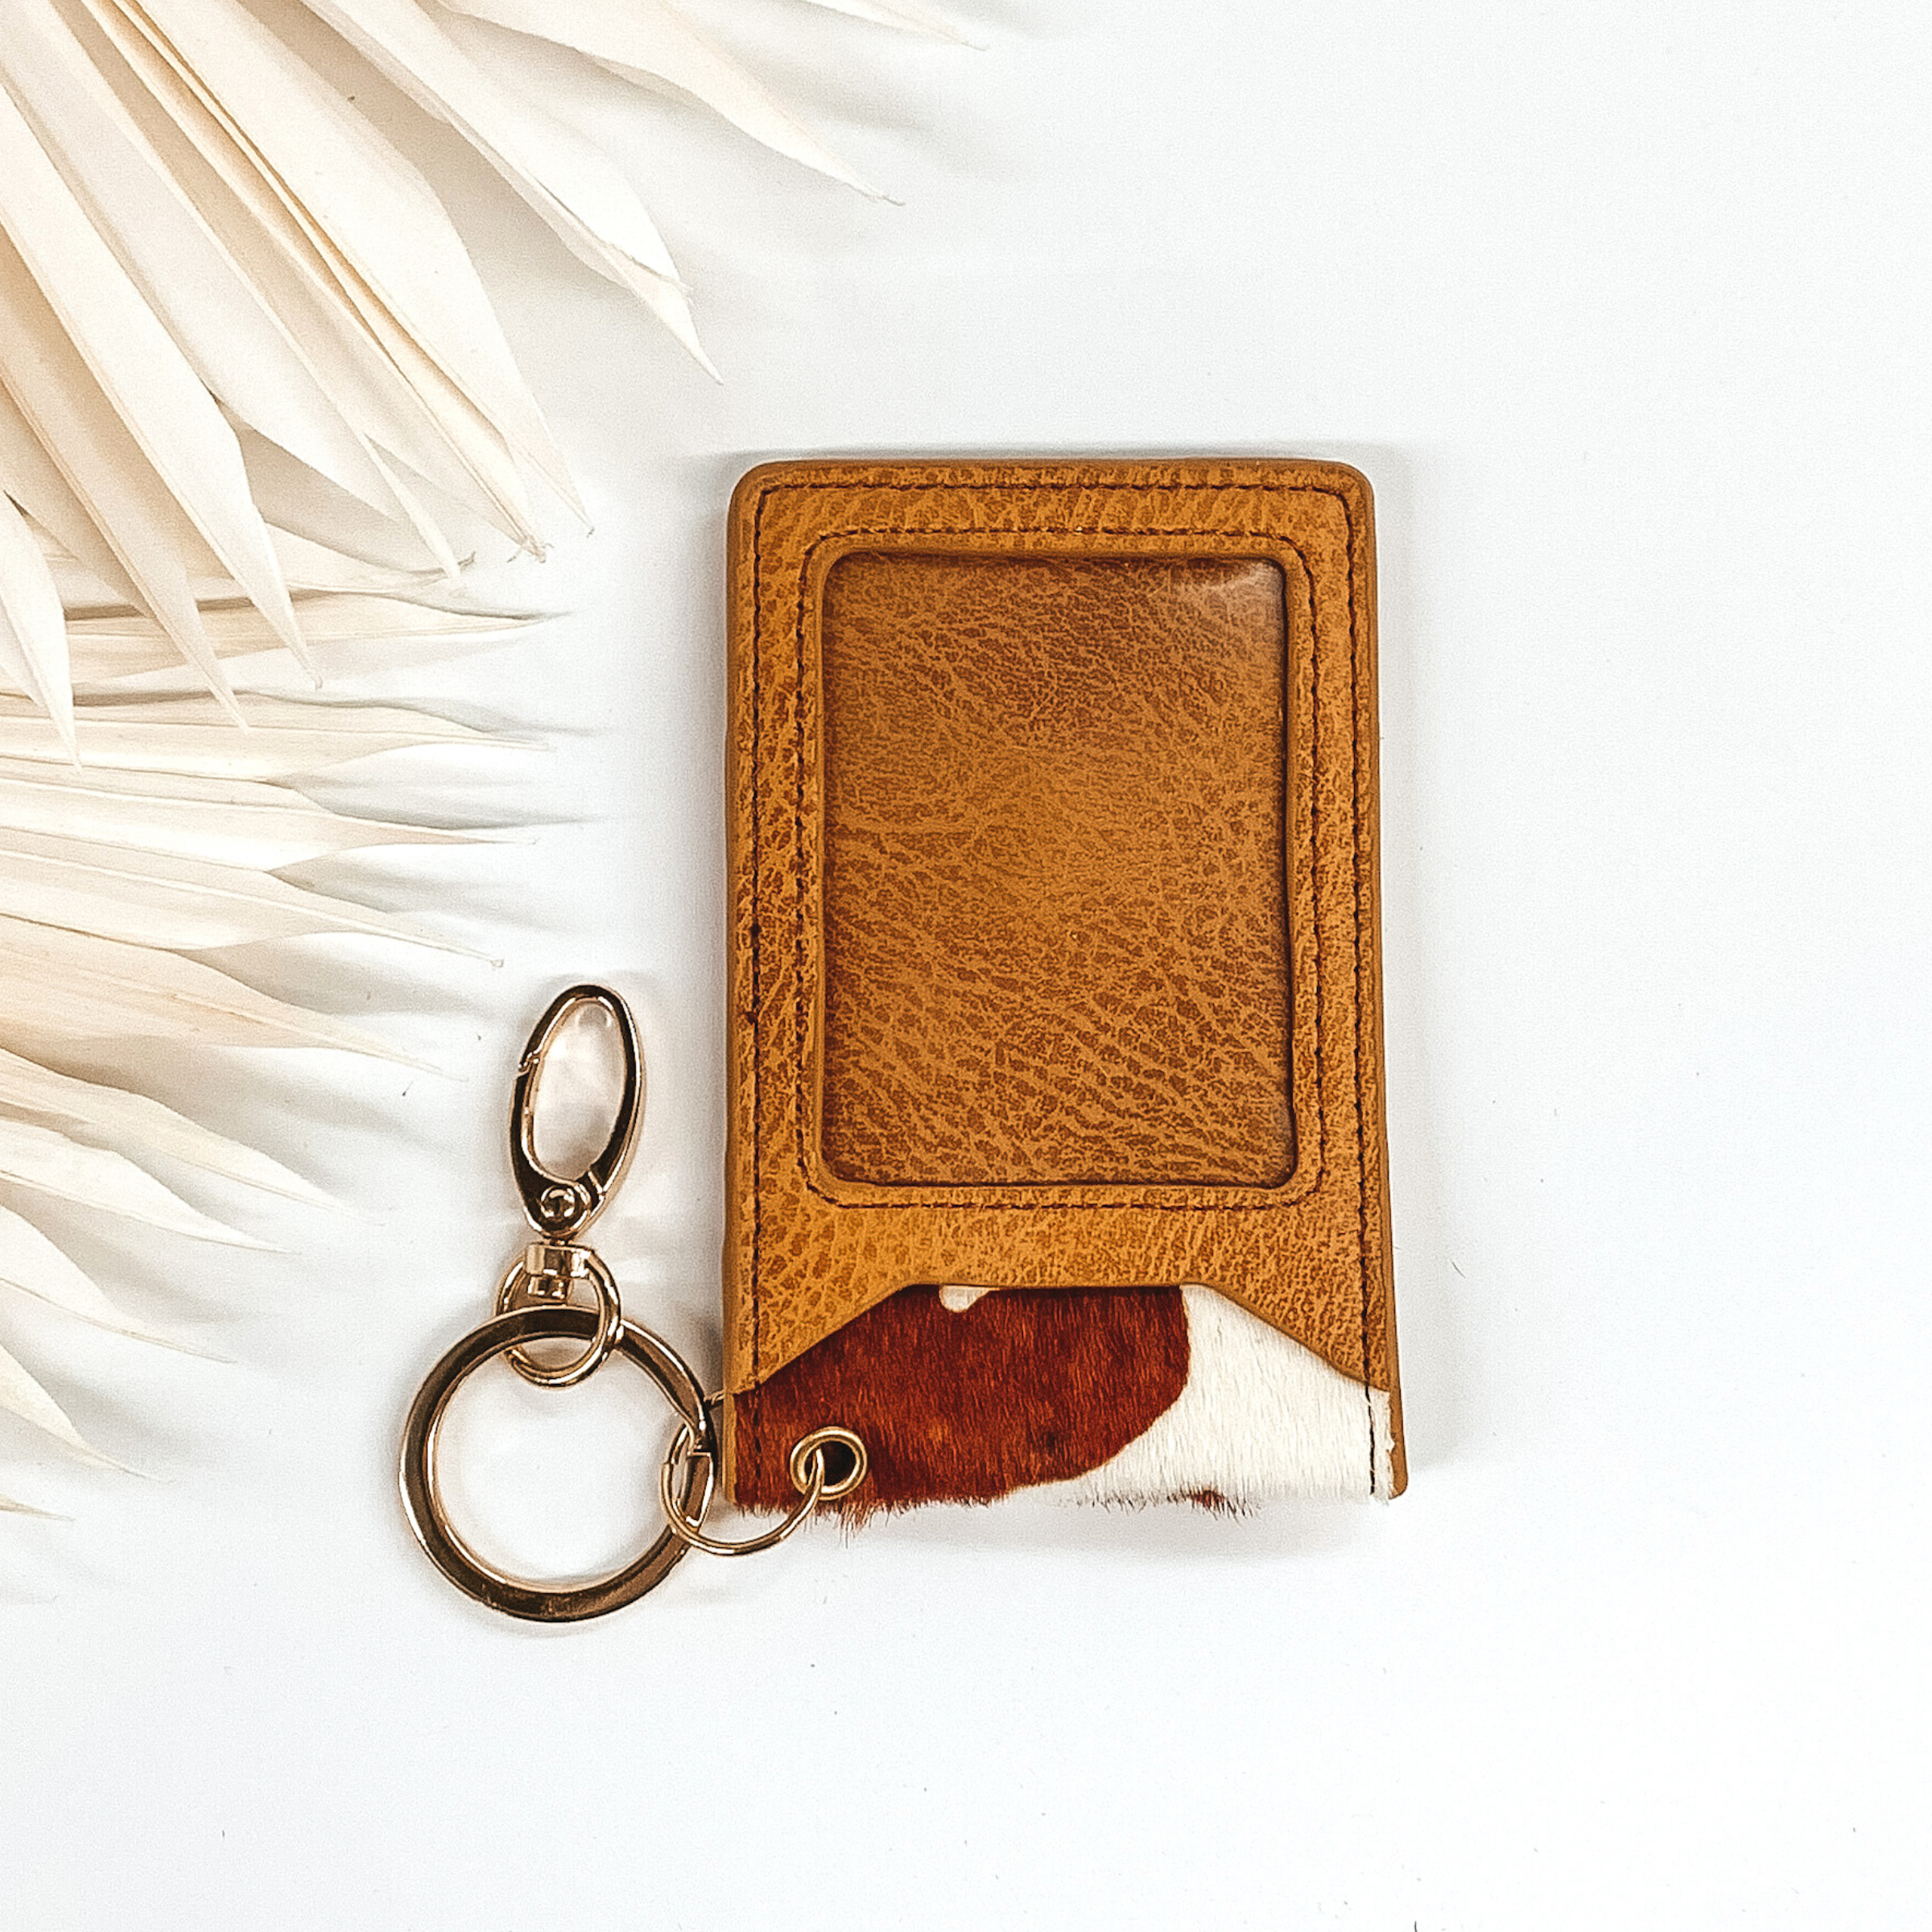 Subtle Luxuries Key Chain Cow Print Wallet in Tan - Giddy Up Glamour Boutique